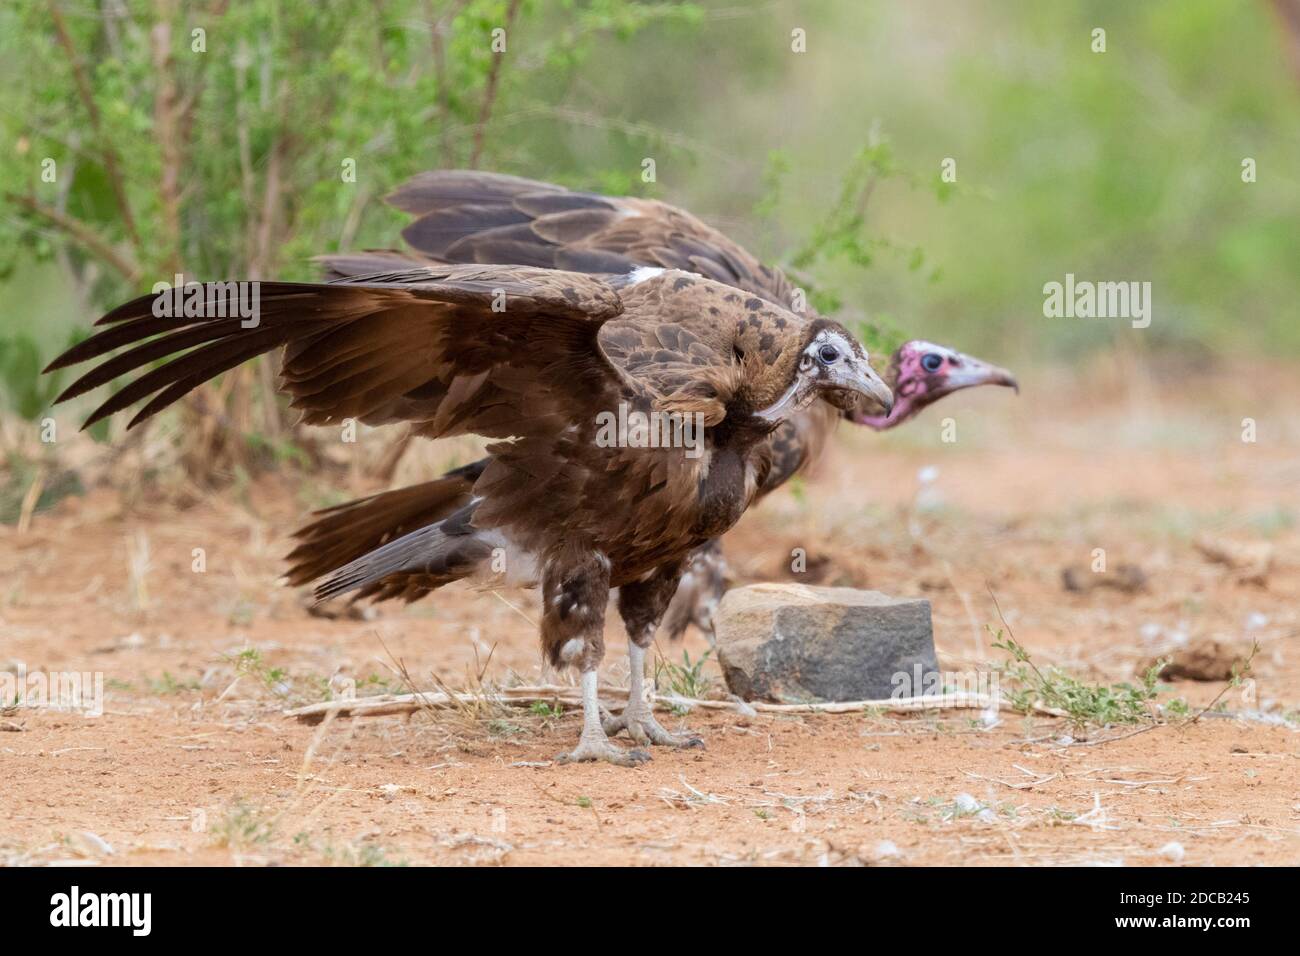 hooded vulture (Necrosyrtes monachus), two juveniles standing on the ground with opened wings, South Africa, Mpumalanga Stock Photo